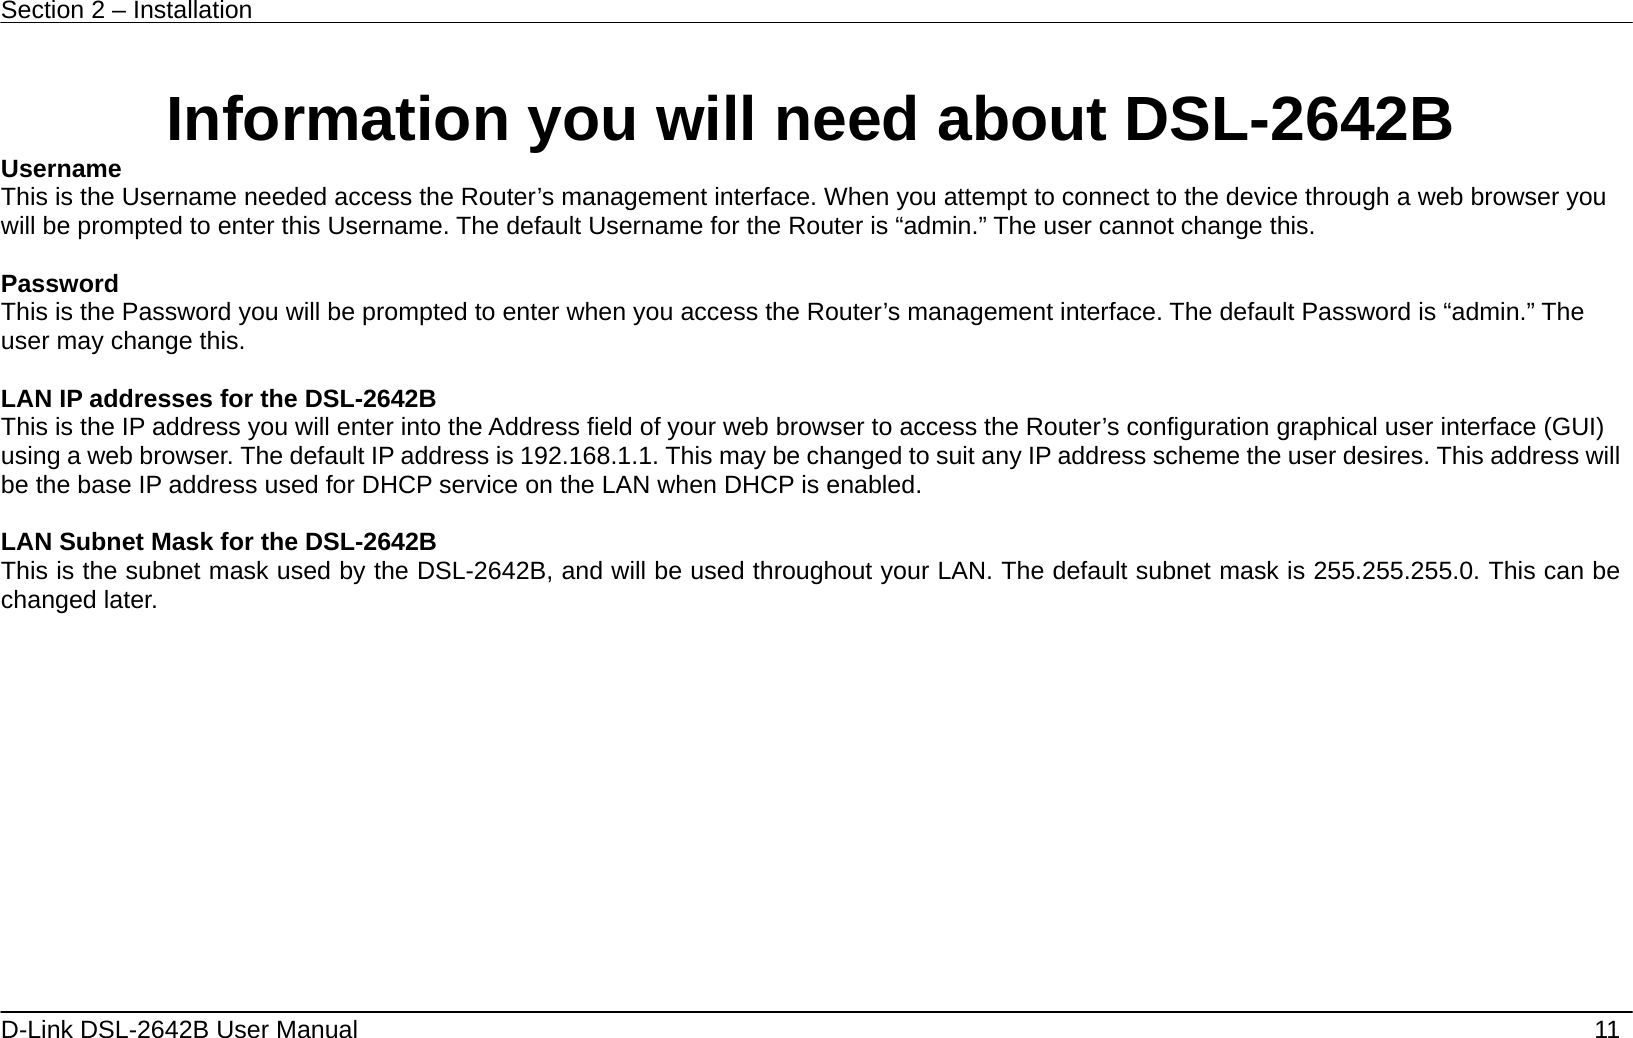 Section 2 – Installation   D-Link DSL-2642B User Manual    11  Information you will need about DSL-2642B Username  This is the Username needed access the Router’s management interface. When you attempt to connect to the device through a web browser you will be prompted to enter this Username. The default Username for the Router is “admin.” The user cannot change this.  Password This is the Password you will be prompted to enter when you access the Router’s management interface. The default Password is “admin.” The user may change this.  LAN IP addresses for the DSL-2642B This is the IP address you will enter into the Address field of your web browser to access the Router’s configuration graphical user interface (GUI) using a web browser. The default IP address is 192.168.1.1. This may be changed to suit any IP address scheme the user desires. This address will be the base IP address used for DHCP service on the LAN when DHCP is enabled.  LAN Subnet Mask for the DSL-2642B This is the subnet mask used by the DSL-2642B, and will be used throughout your LAN. The default subnet mask is 255.255.255.0. This can be changed later.   